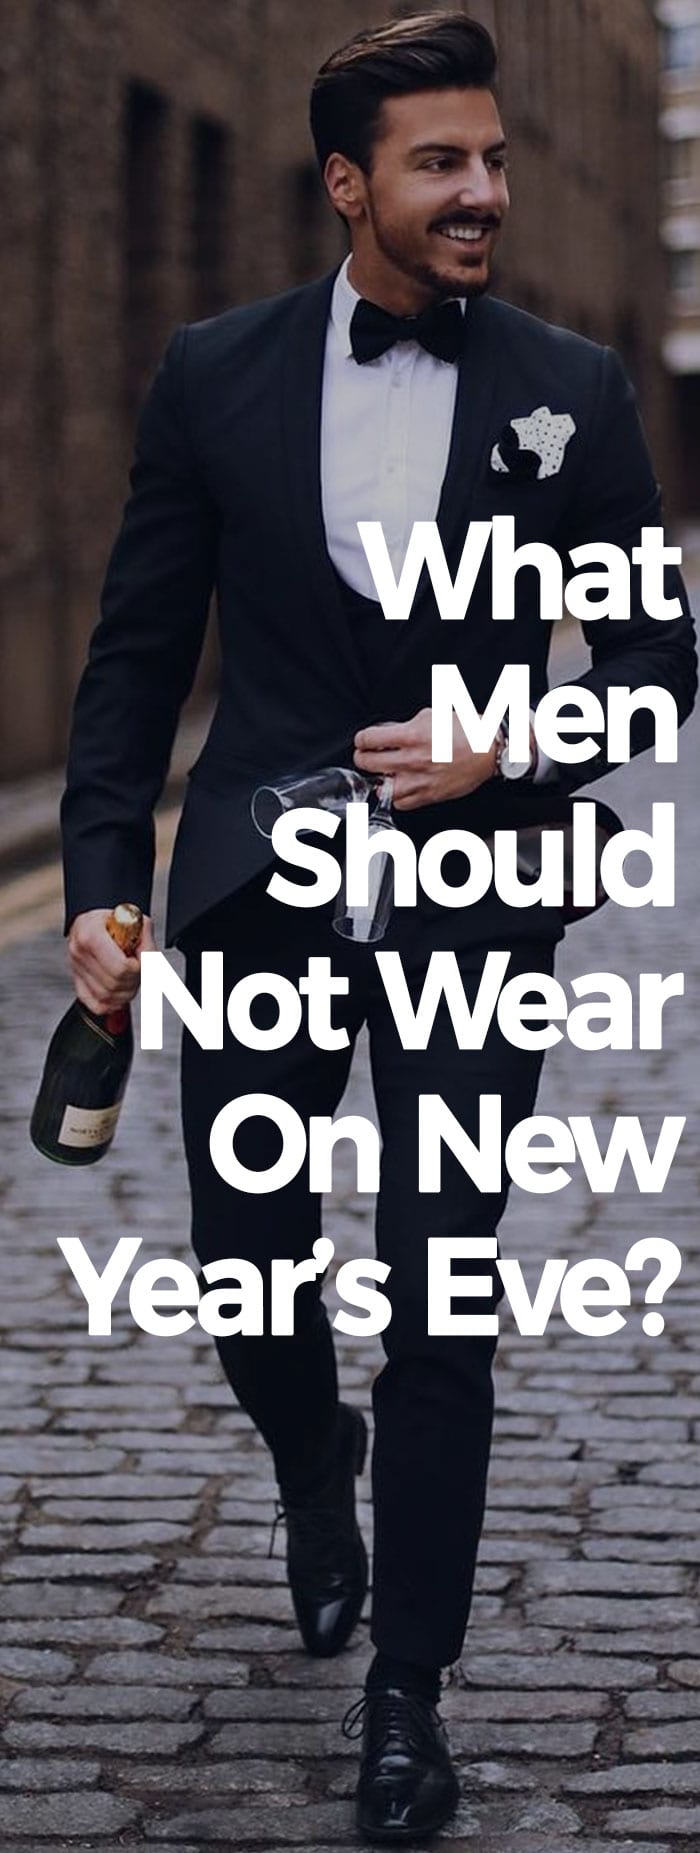 What Men Should Not Wear On New Years Eve